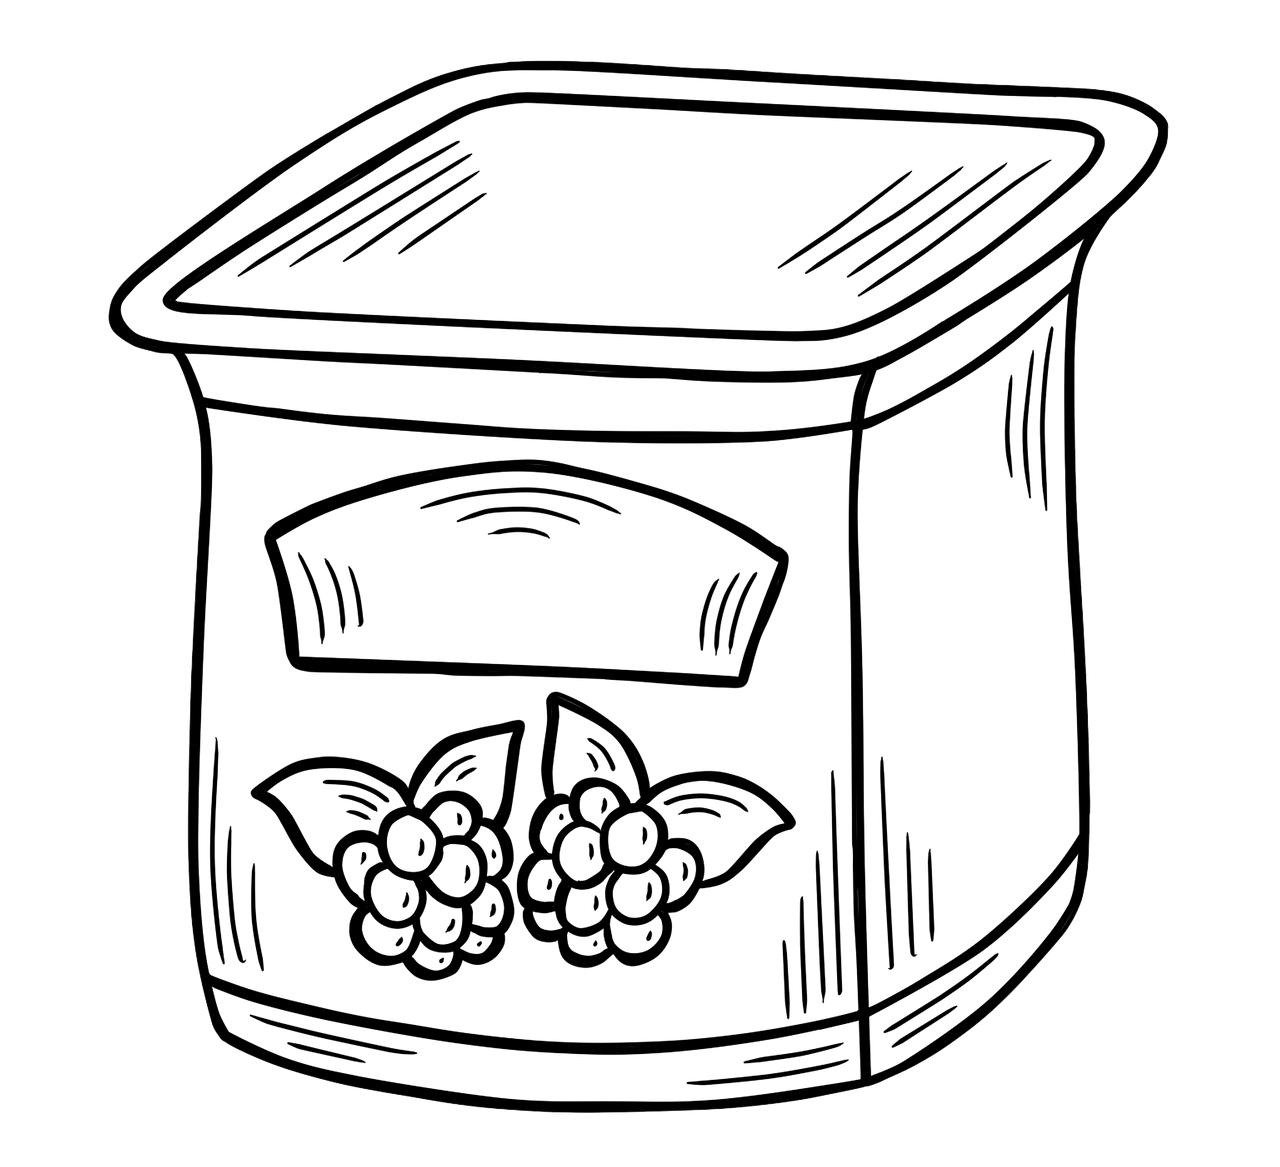 a jar of fruit sitting on top of a table, lineart, case, high contrast illustration, illustration, cartoon image